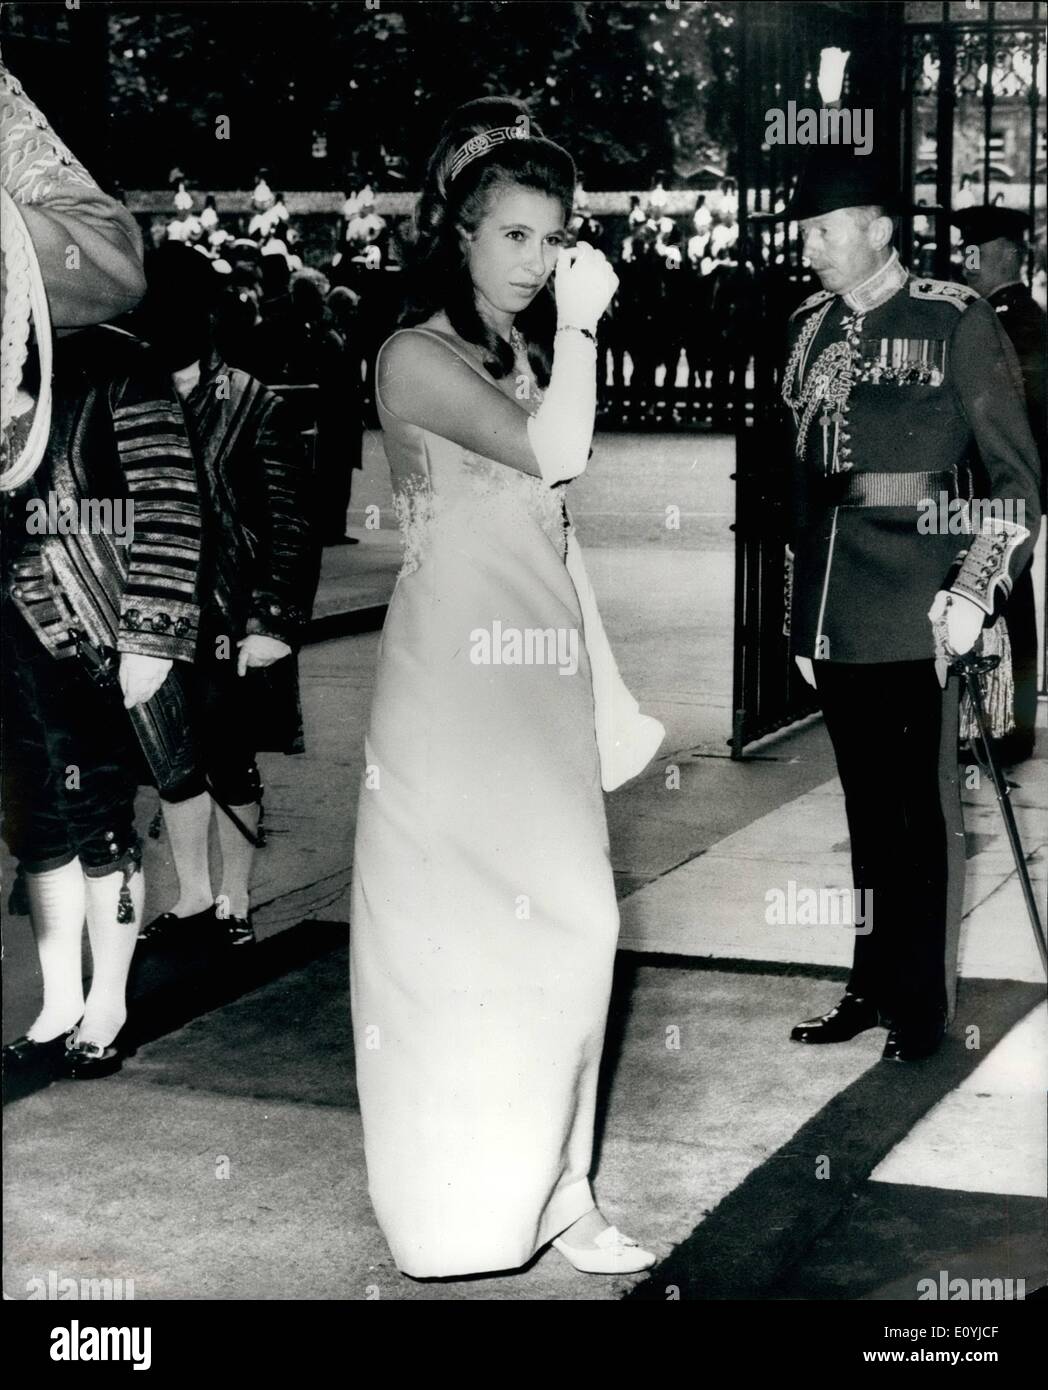 jul-07-1970-state-opening-of-parliament-princess-anne-arrives-princess-E0YJCF.jpg